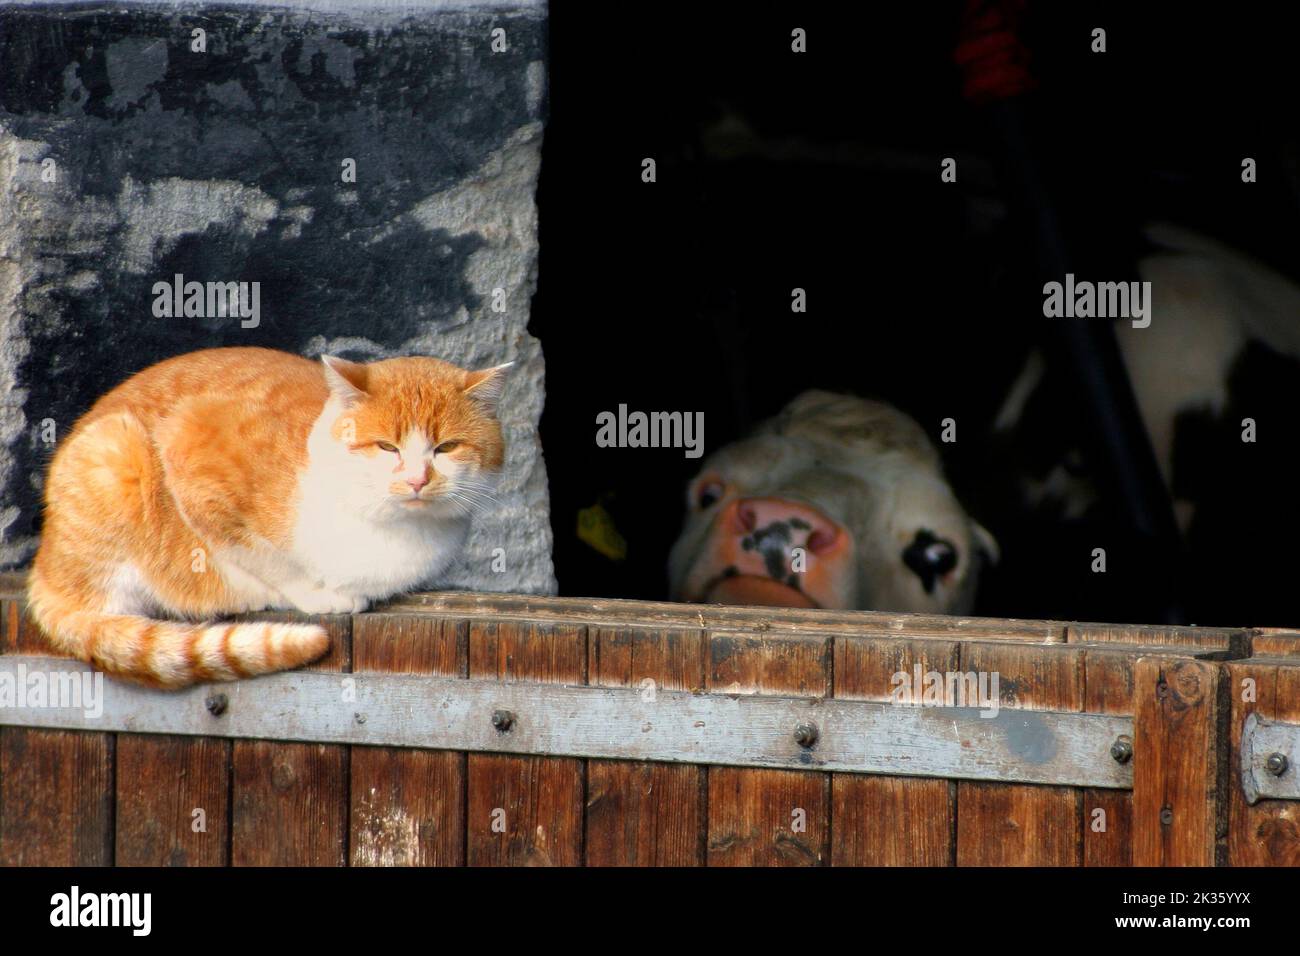 Ginger cat and cow in stable, Chiemgau, Upper Bavaria, Germany Stock Photo